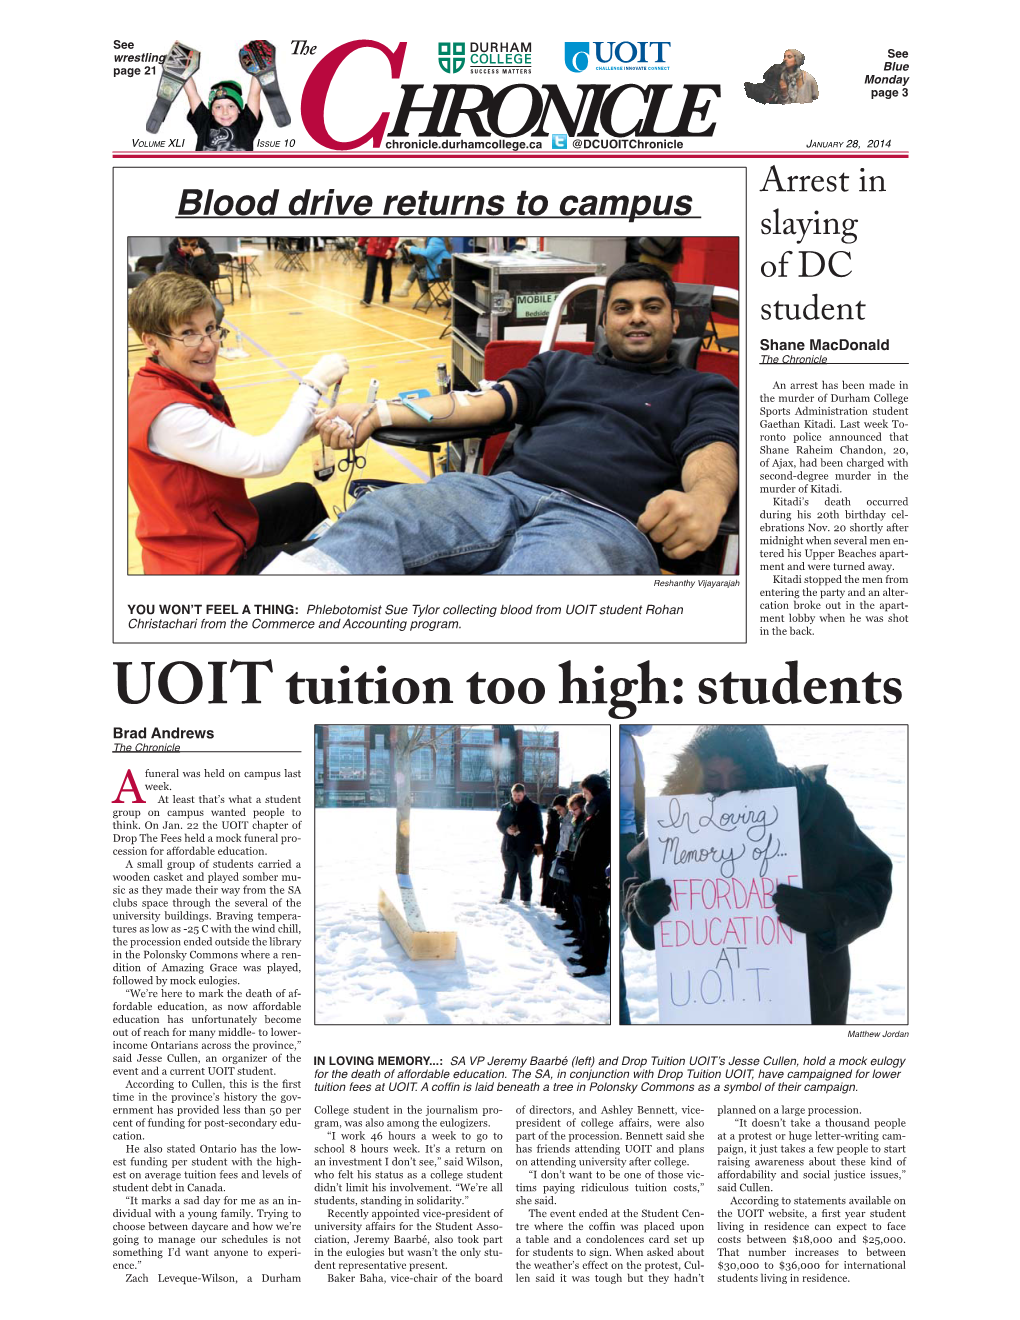 UOIT Tuition Too High: Students Brad Andrews the Chronicle